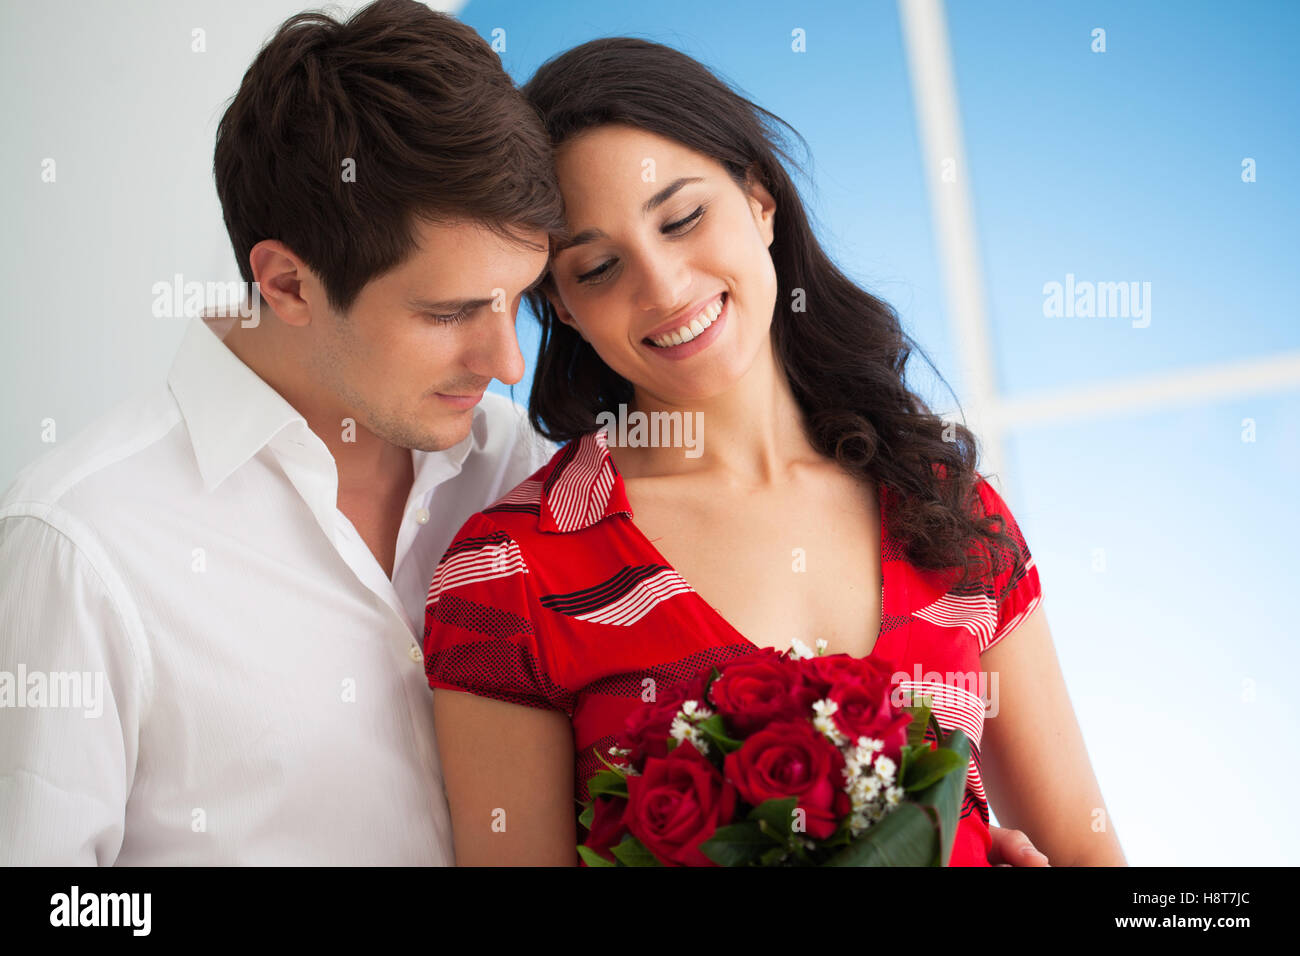 Woman holding flowers she got from her boyfriend on Valentine's Day. Stock Photo